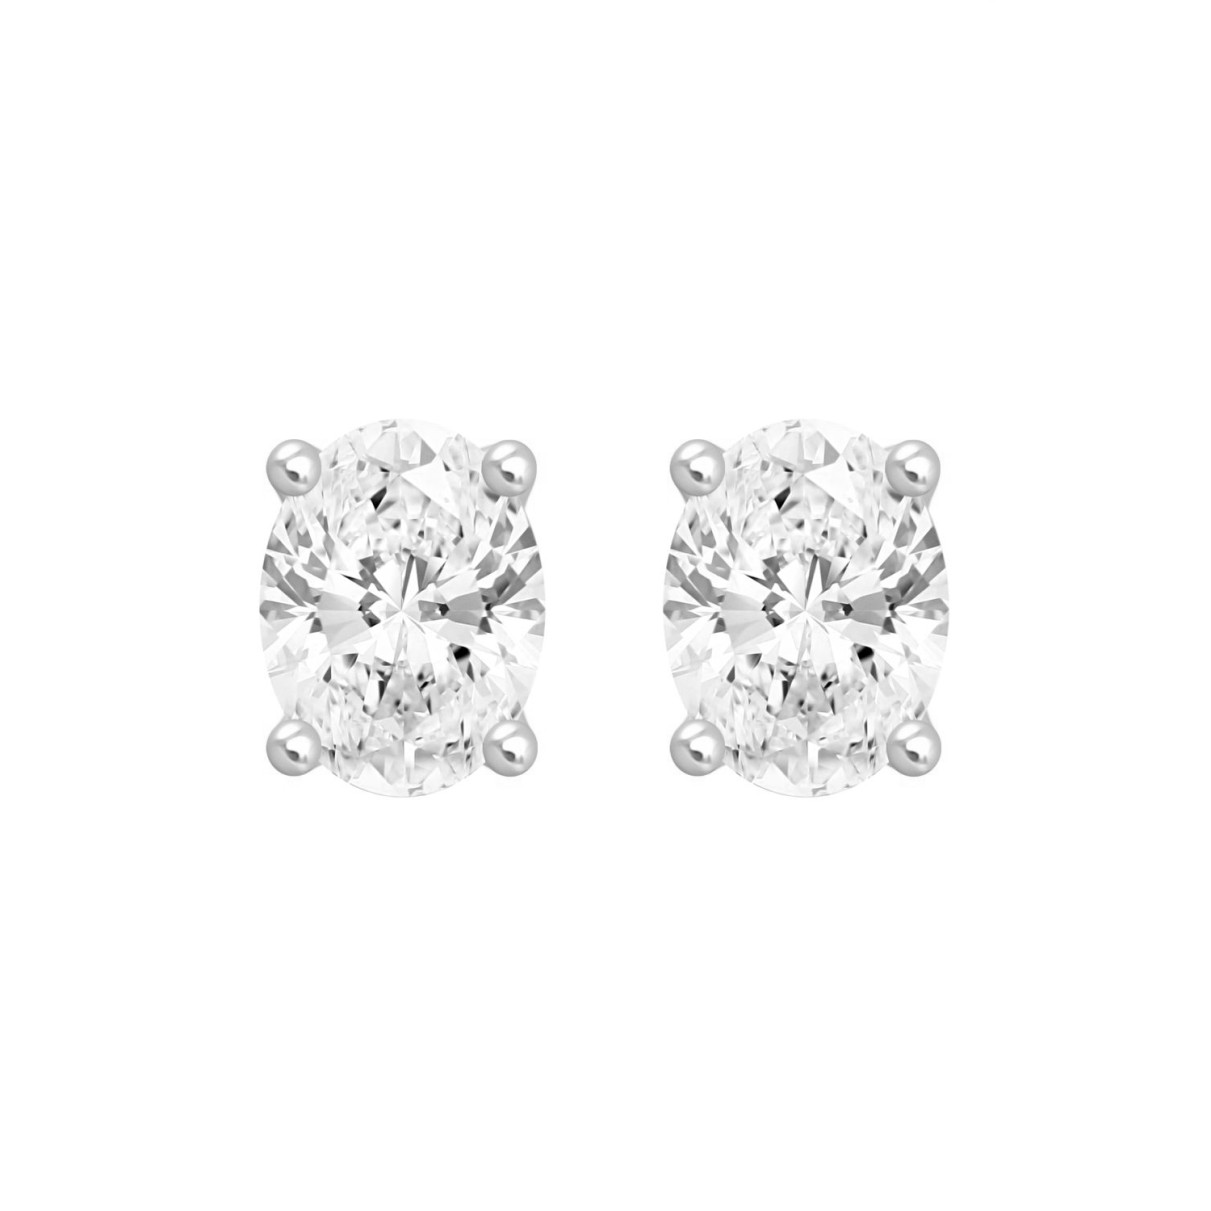 LADIES SOLITAIRE EARRINGS 3CT OVAL DIAMOND 14K WHITE GOLD (CENTER STONE OVAL DIAMOND 1 1/2CT )